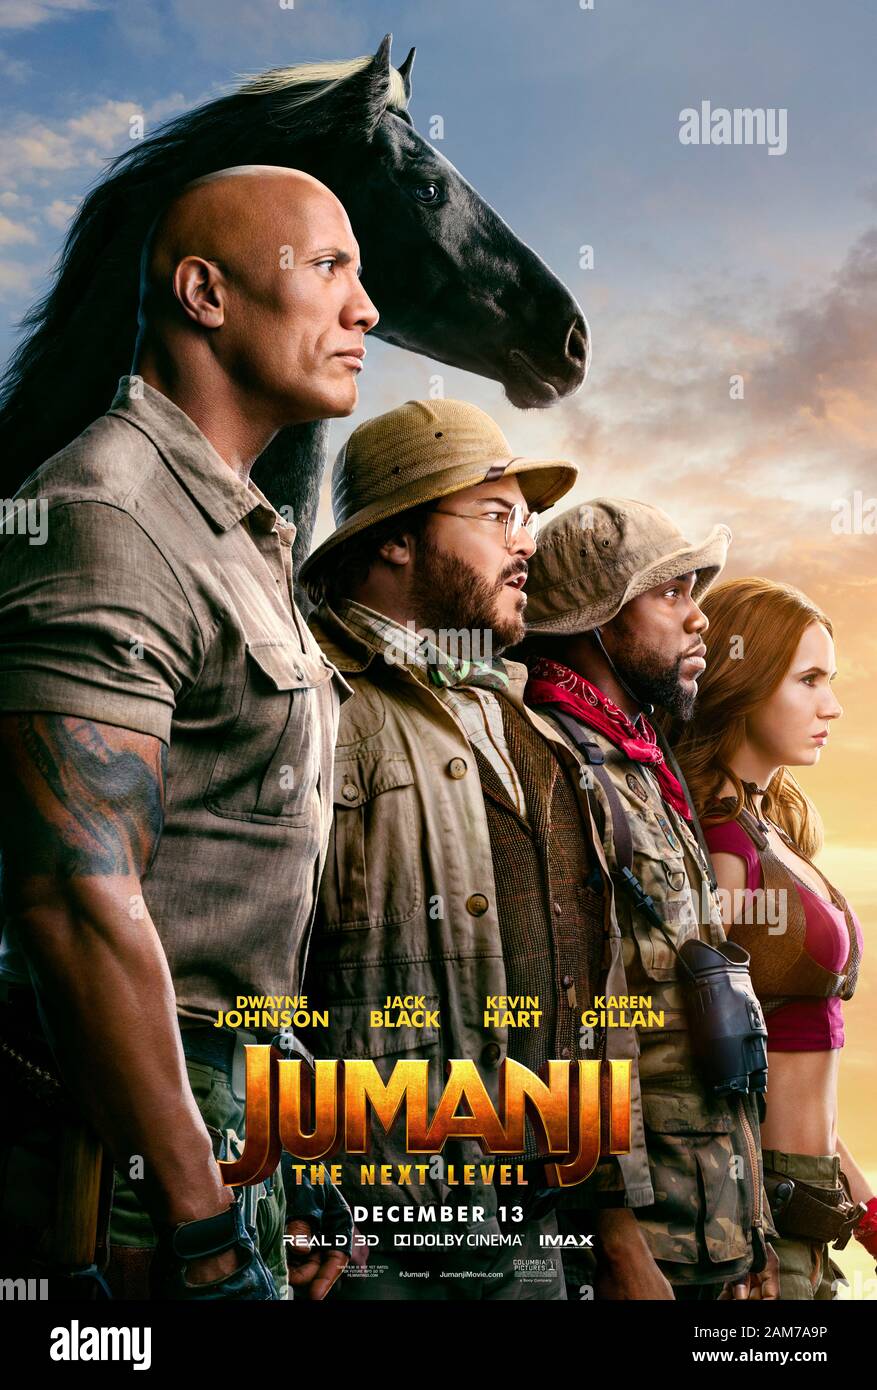 Jumanji: The Next Level (2019) directed by Jake Kasdan and starring Dwayne Johnson, Jack Black, Kevin Hart and Karen Gillan. The old video game malfunctions brings new surprises for the players. Stock Photo